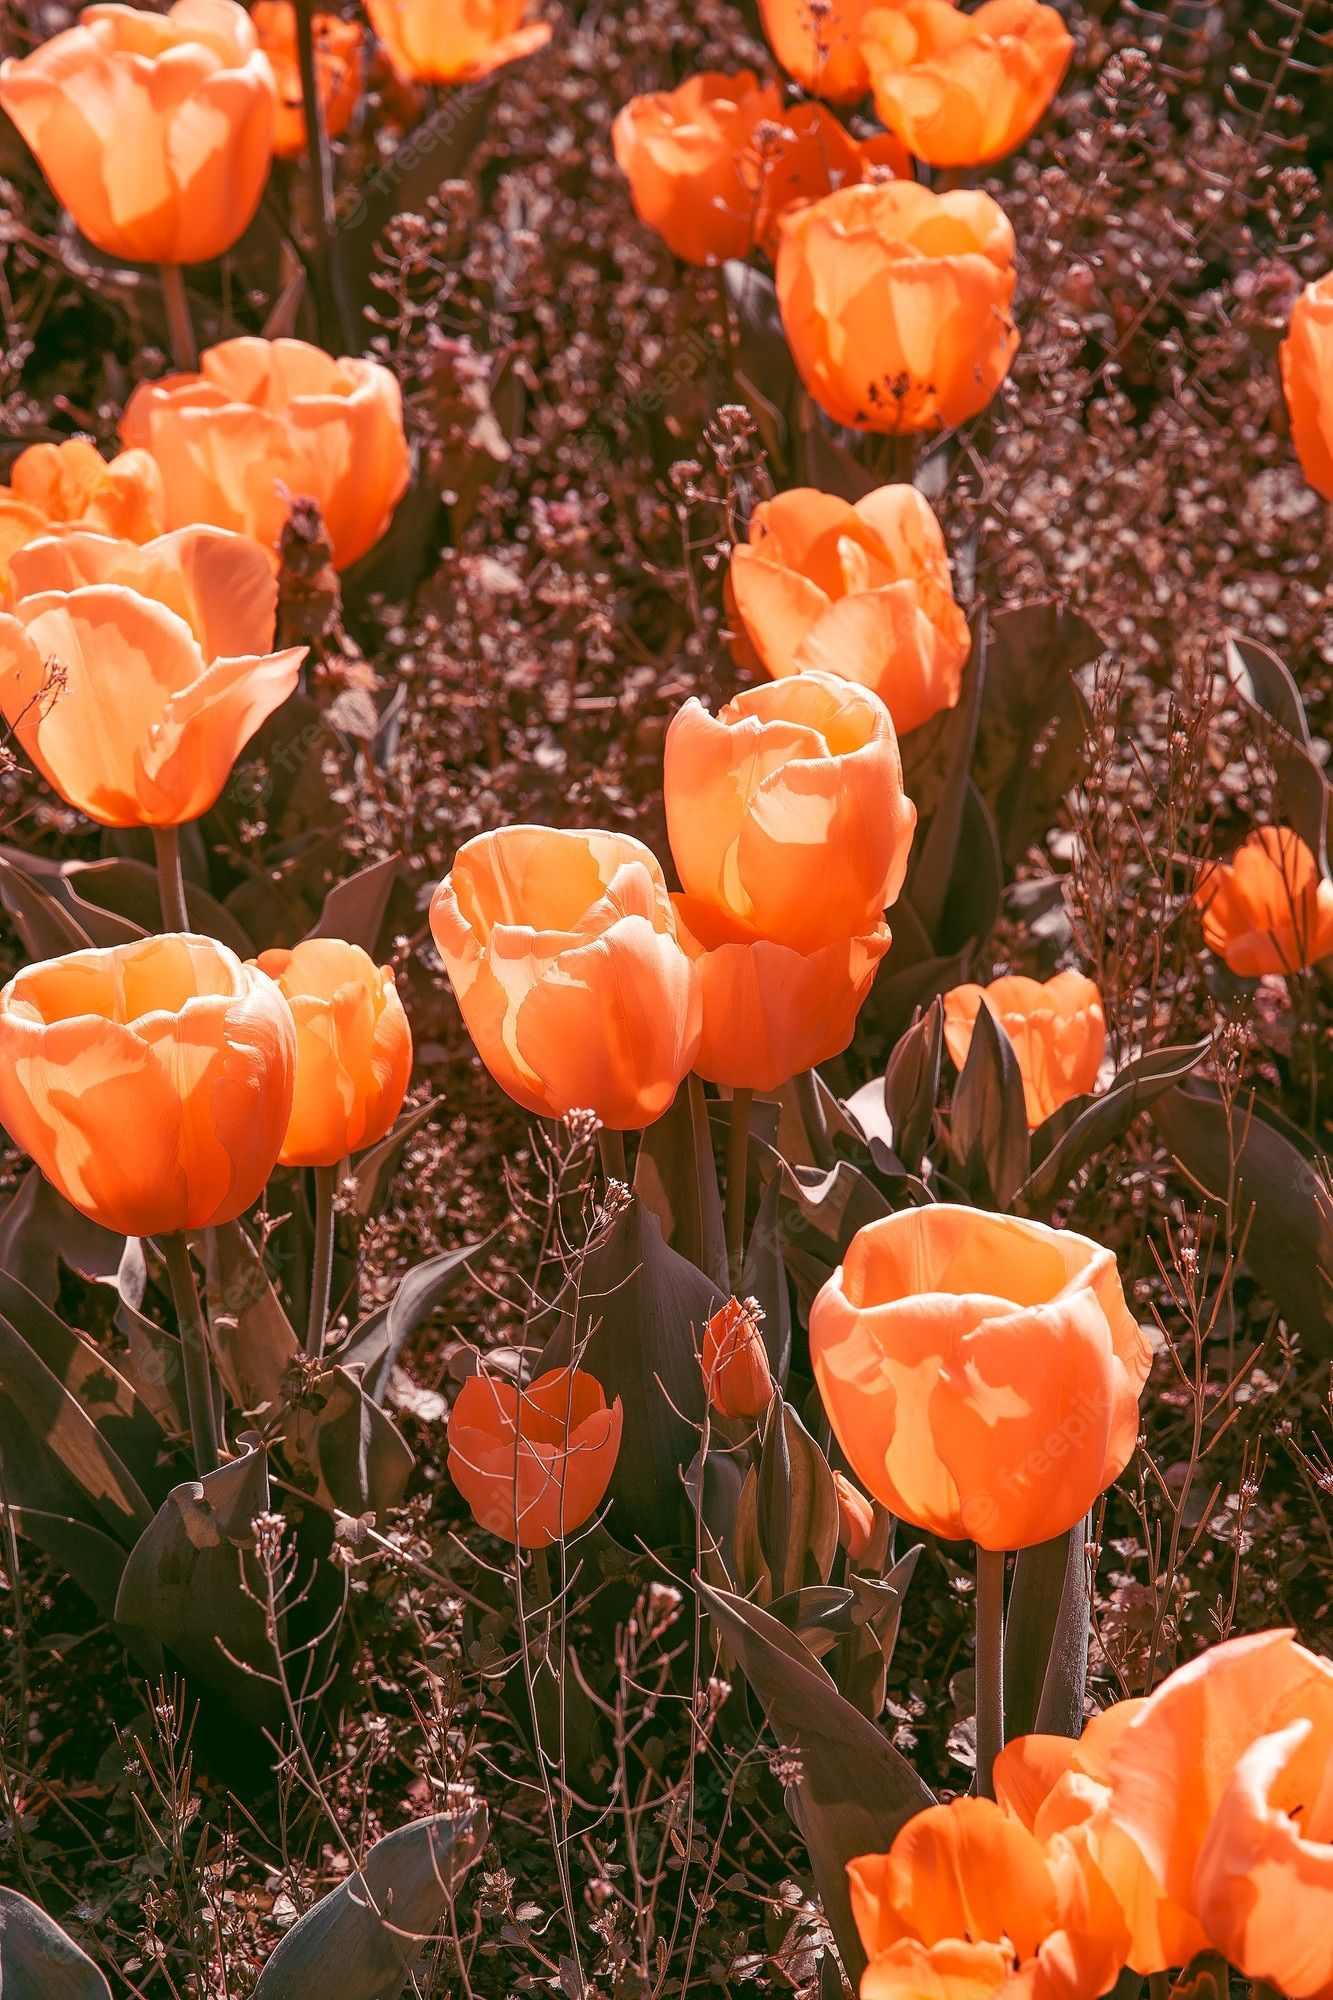 A field of orange tulips with some petals starting to fade. - Tulip